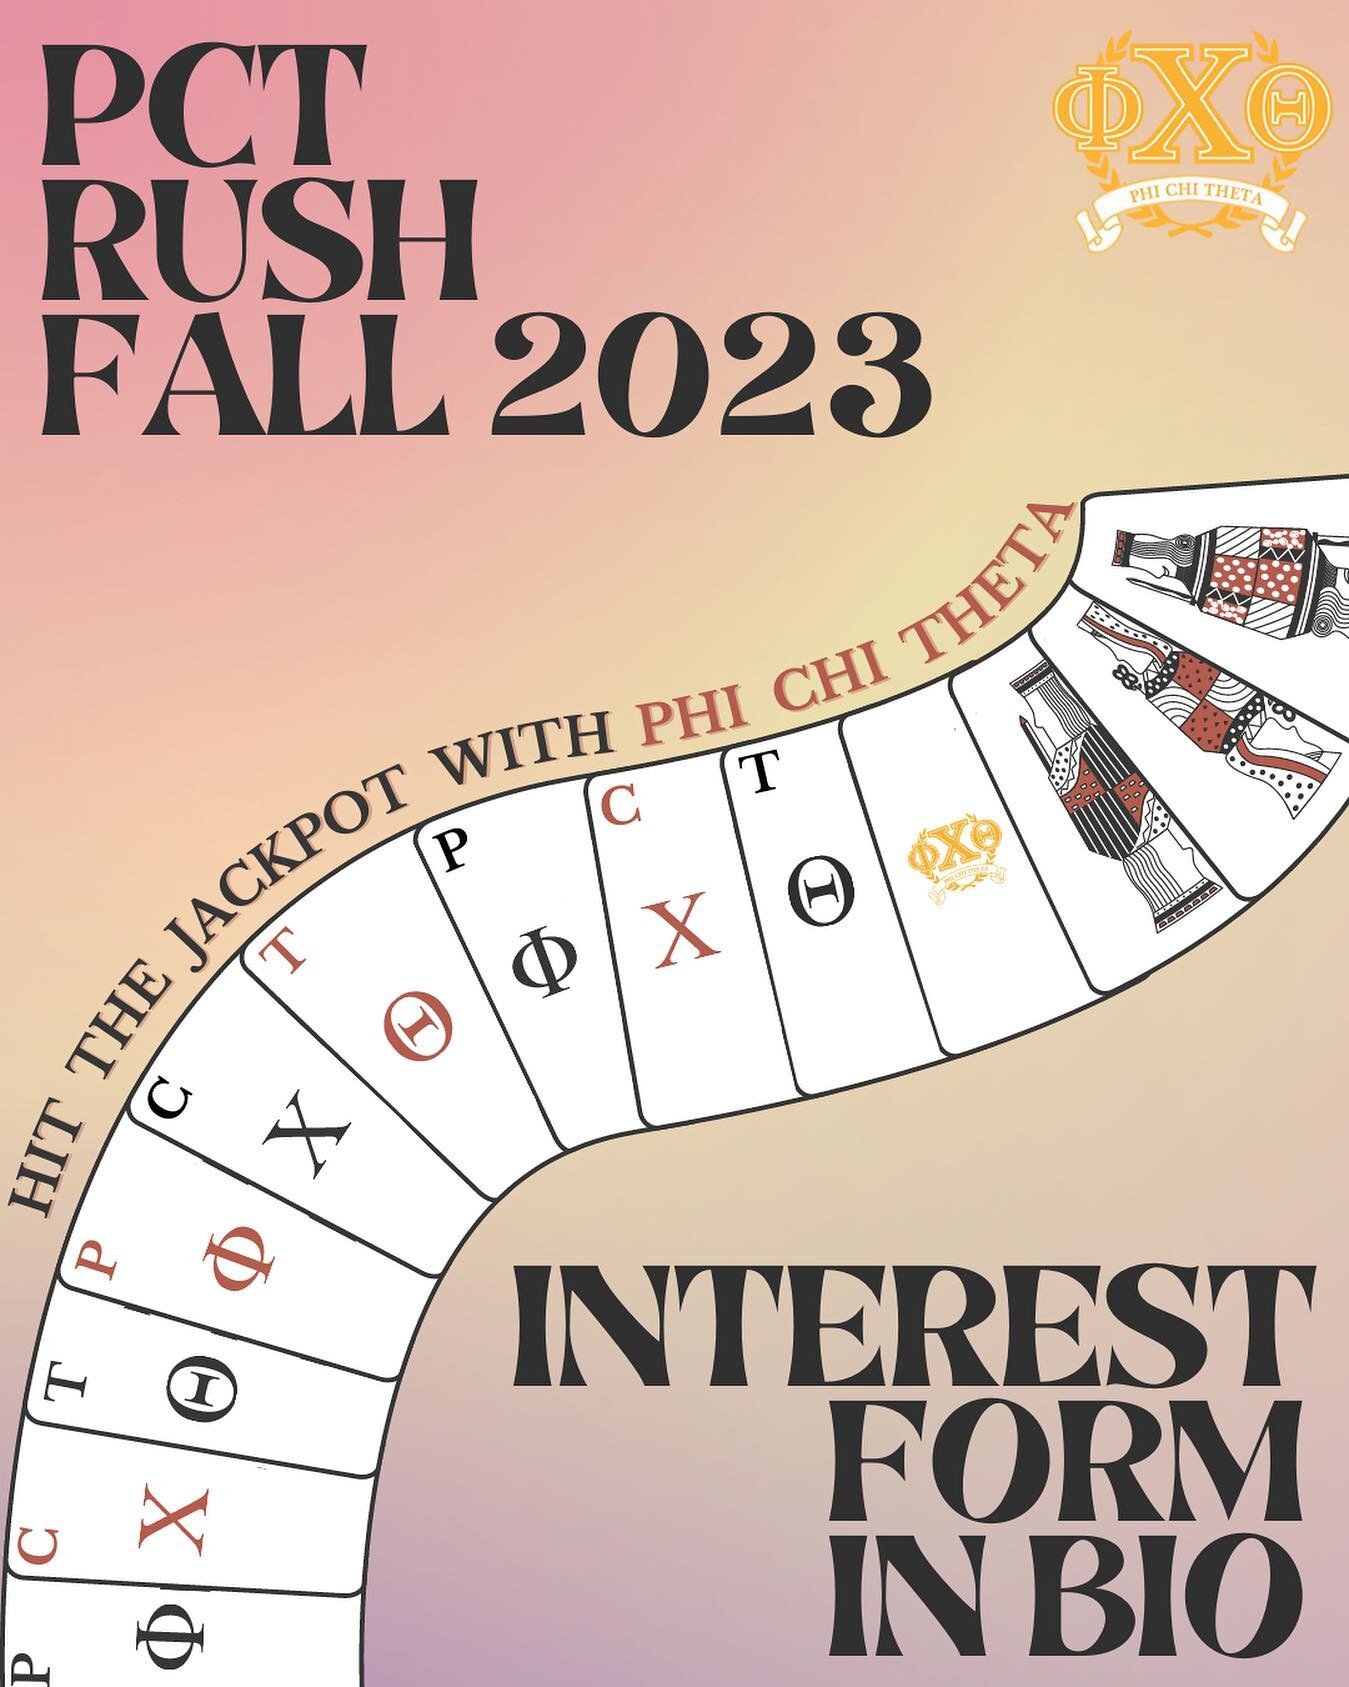 🎰 RUSH PHI CHI THETA FALL 2023 🎰 Win big with PCT this fall! Fill out the interest form in our bio and stay tuned for our rush schedule!